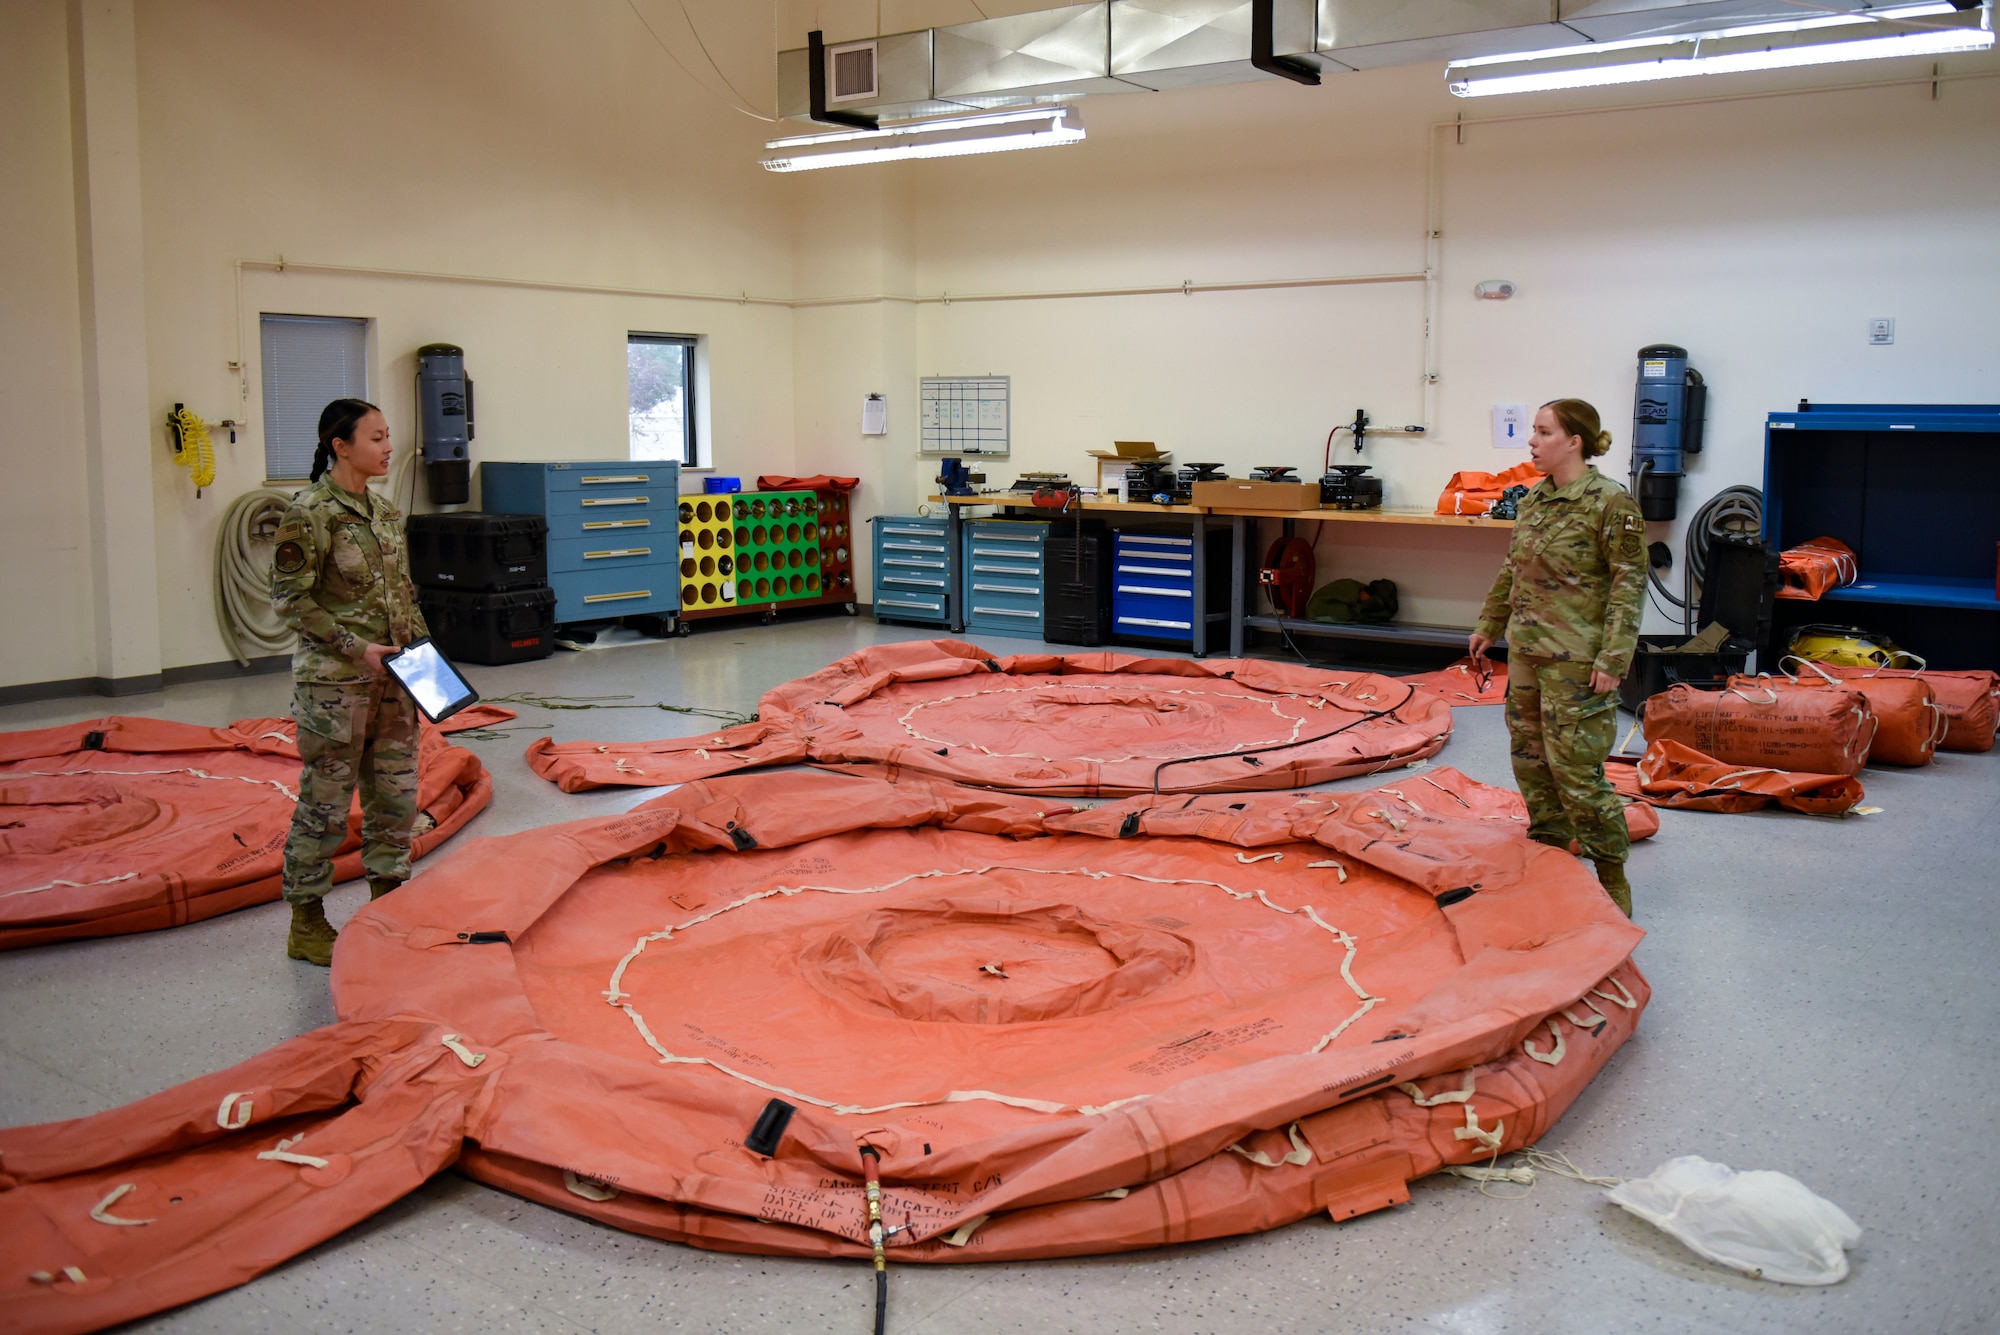 U.S. Air Force Staff Sgt. Lillie Schindlbeck, 92nd Operation Support Squadron Aircrew Flight Equipment technician, (left) goes over the procedure for inflating a 20 man raft with  Staff Sgt. Nicole Harper, 92nd OSS AFE technician, (right) on Fairchild Air Force Base, Washington, May 3, 2022. AFE ensures mission readiness and safety by thoroughly examining and repairing essential gear. (U.S. Air Force photo by Airmen 1st Class Haiden Morris)